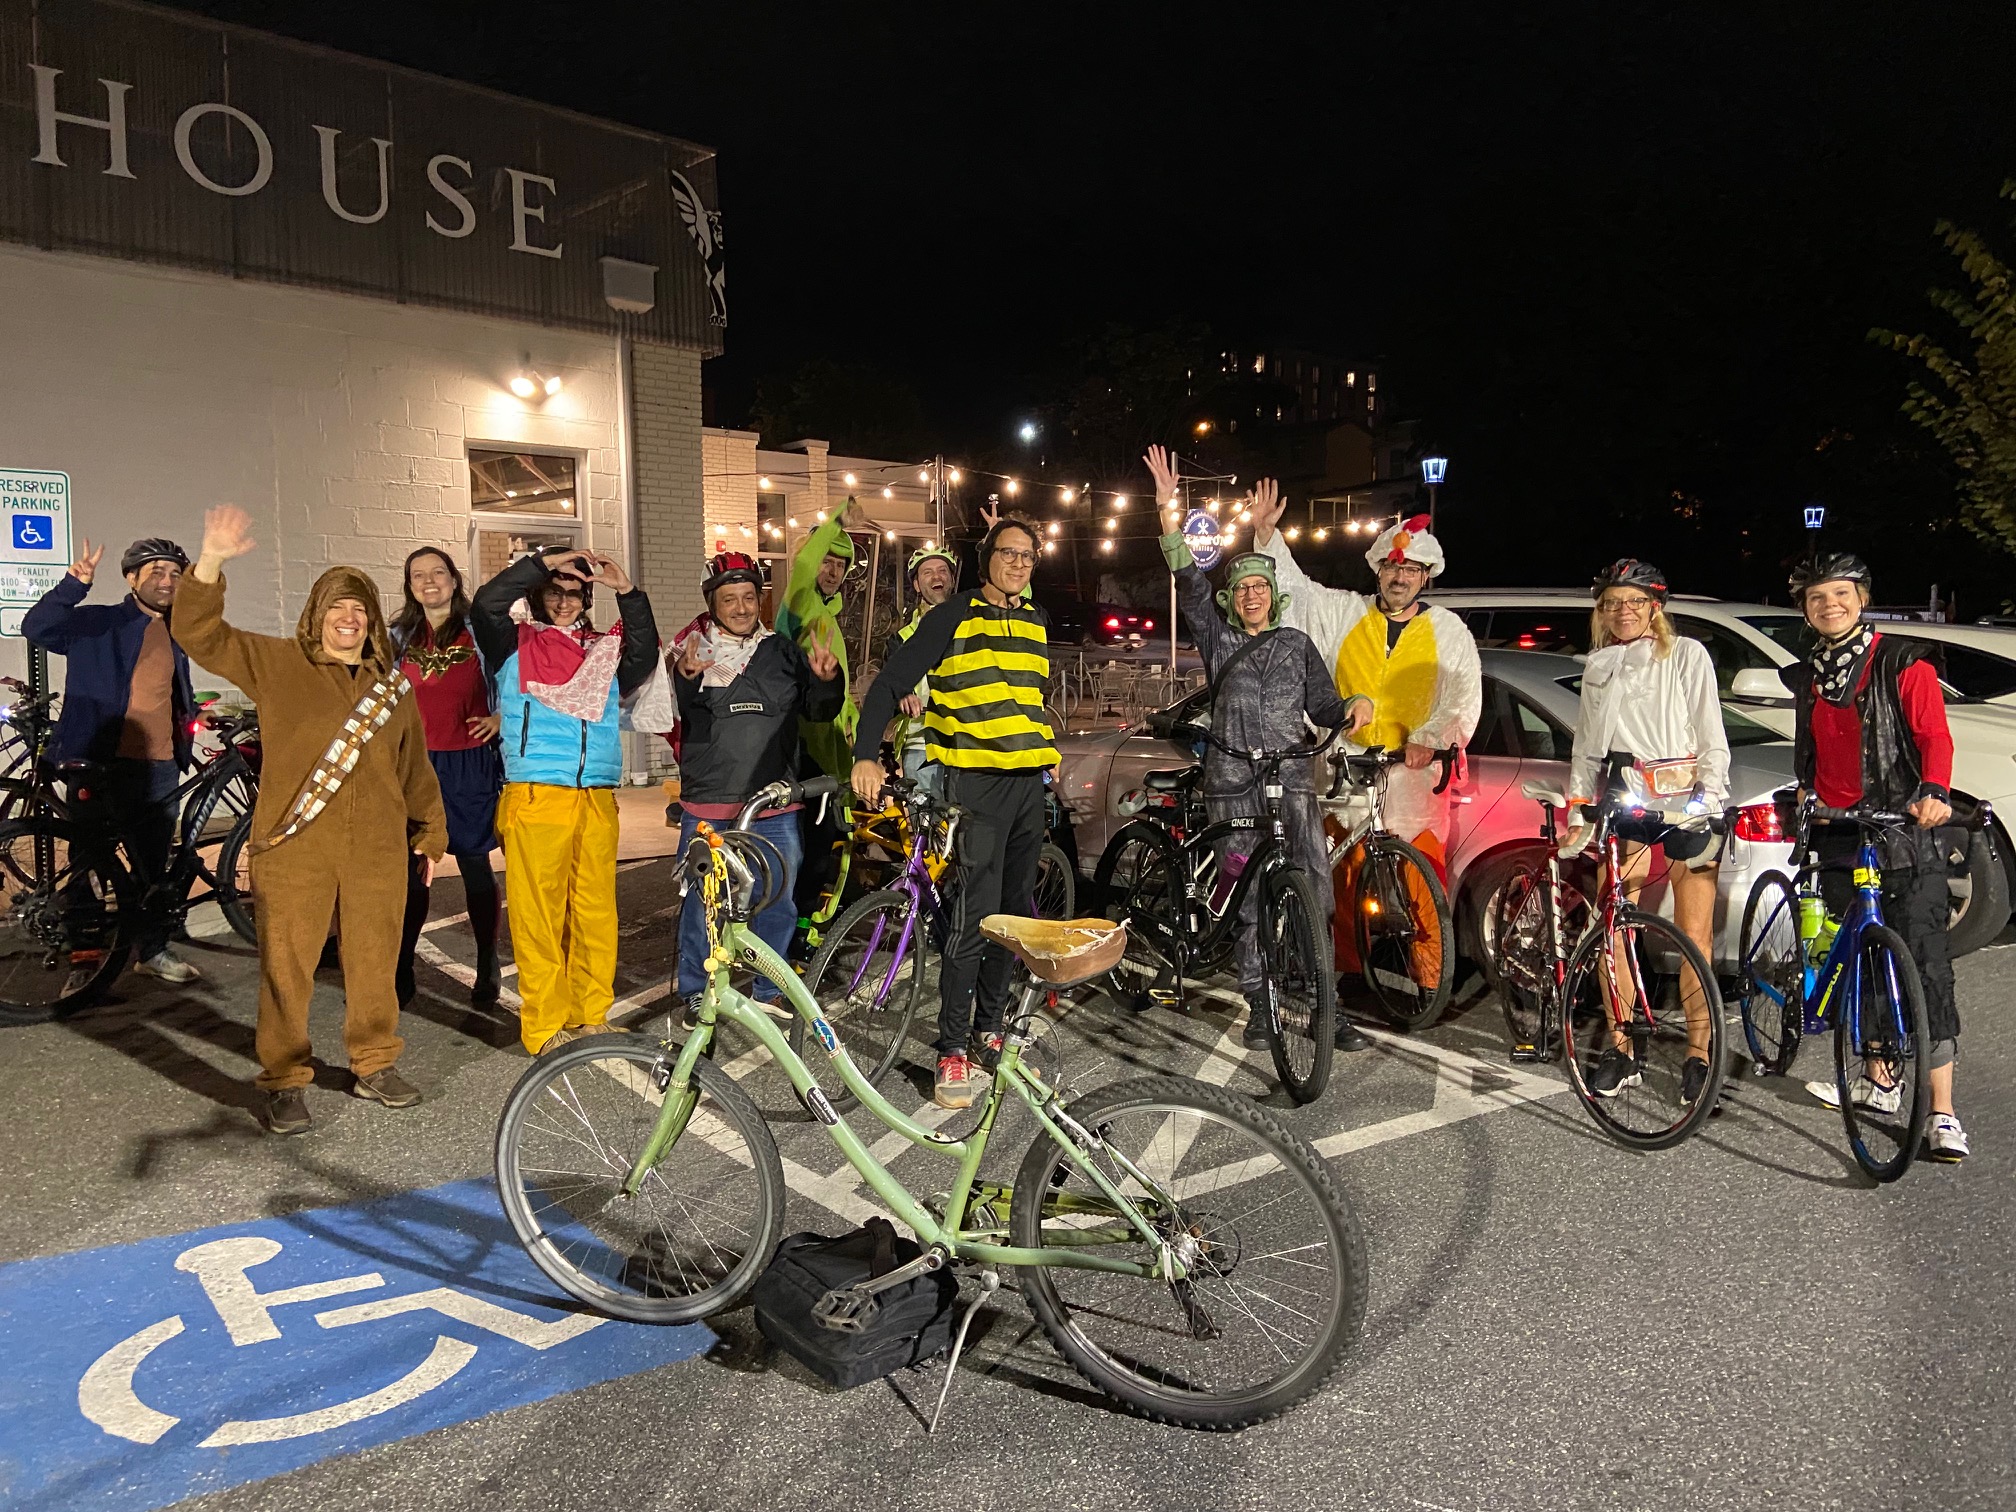 a group of bikers wearing festive Halloween costumes in a parking lot